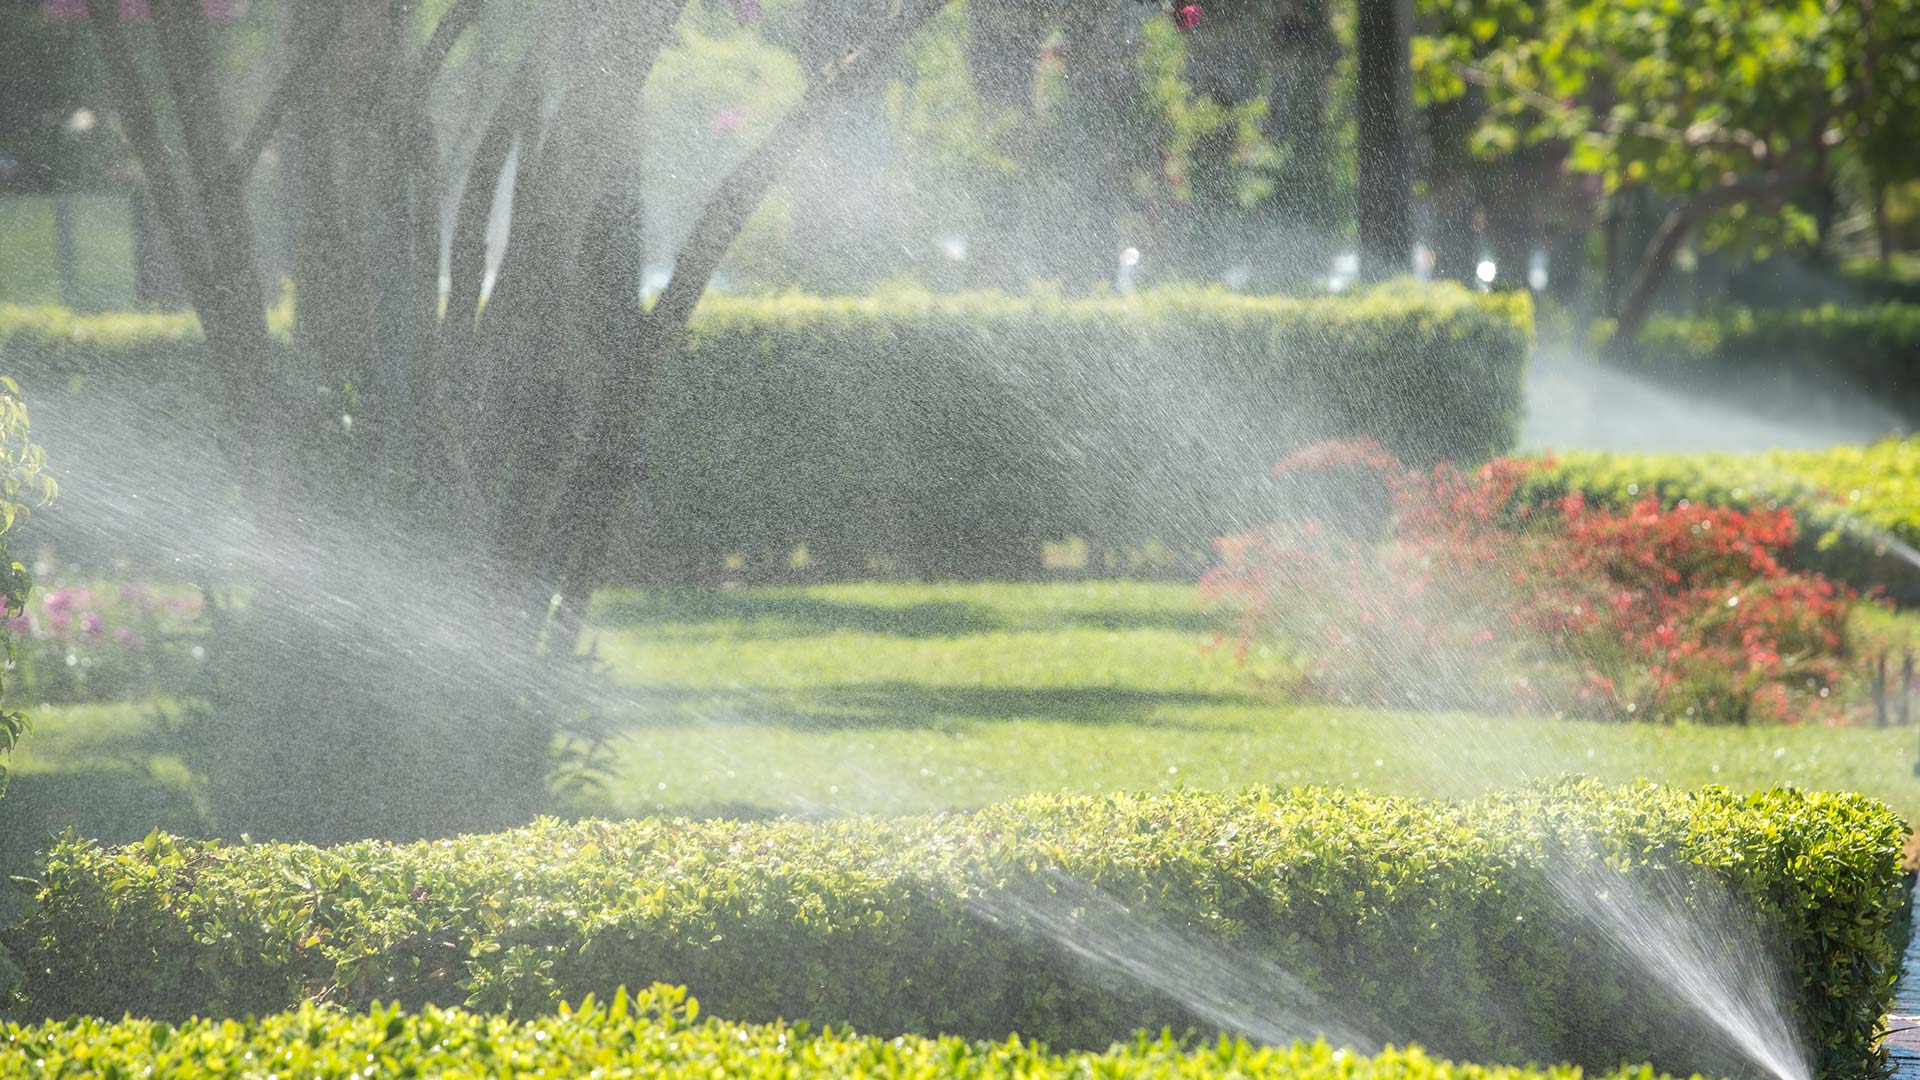 Save Water, Time & Money with an Irrigation System